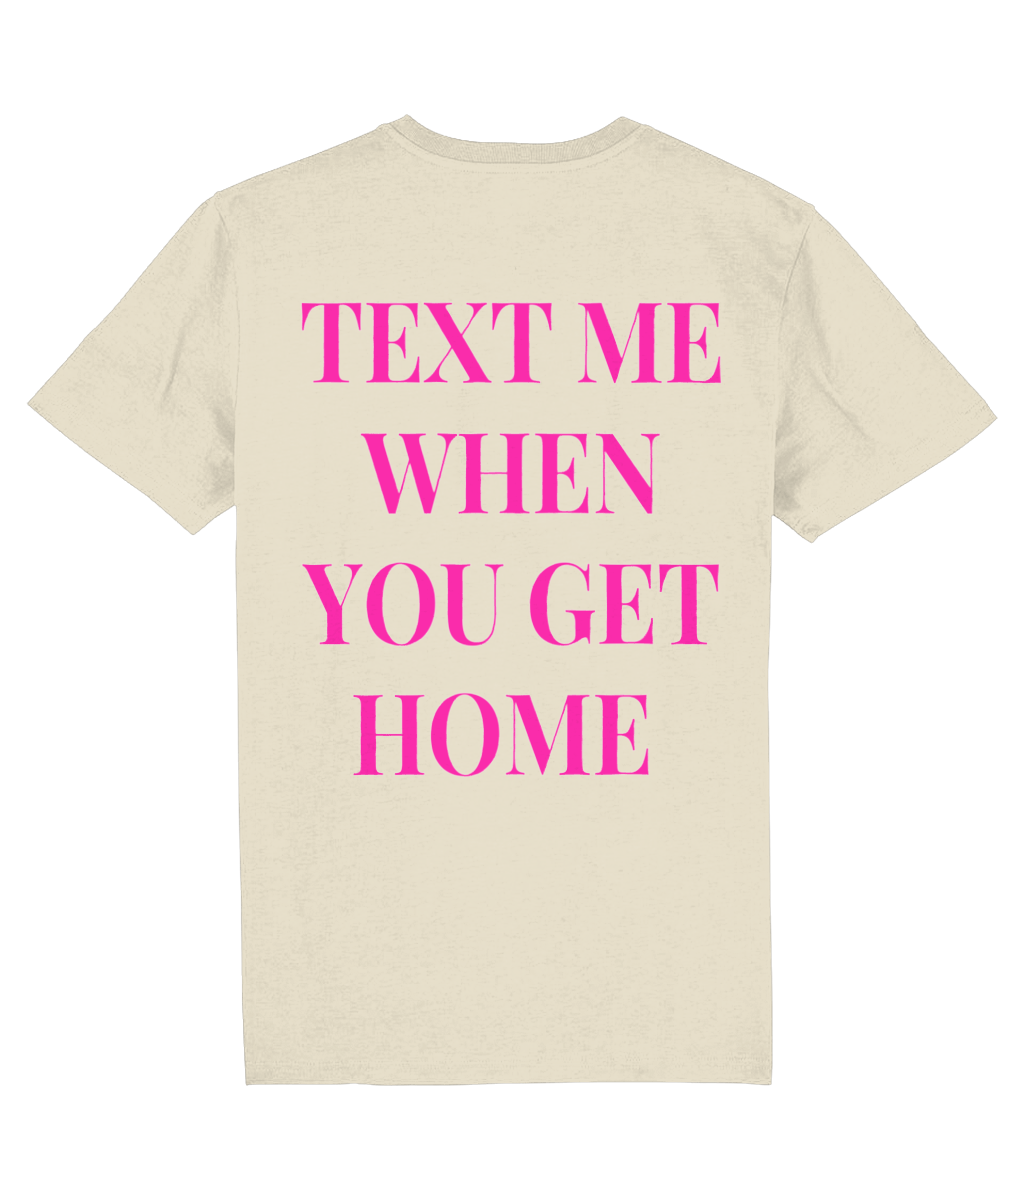 TEXT ME WHEN YOU GET HOME SHIRT